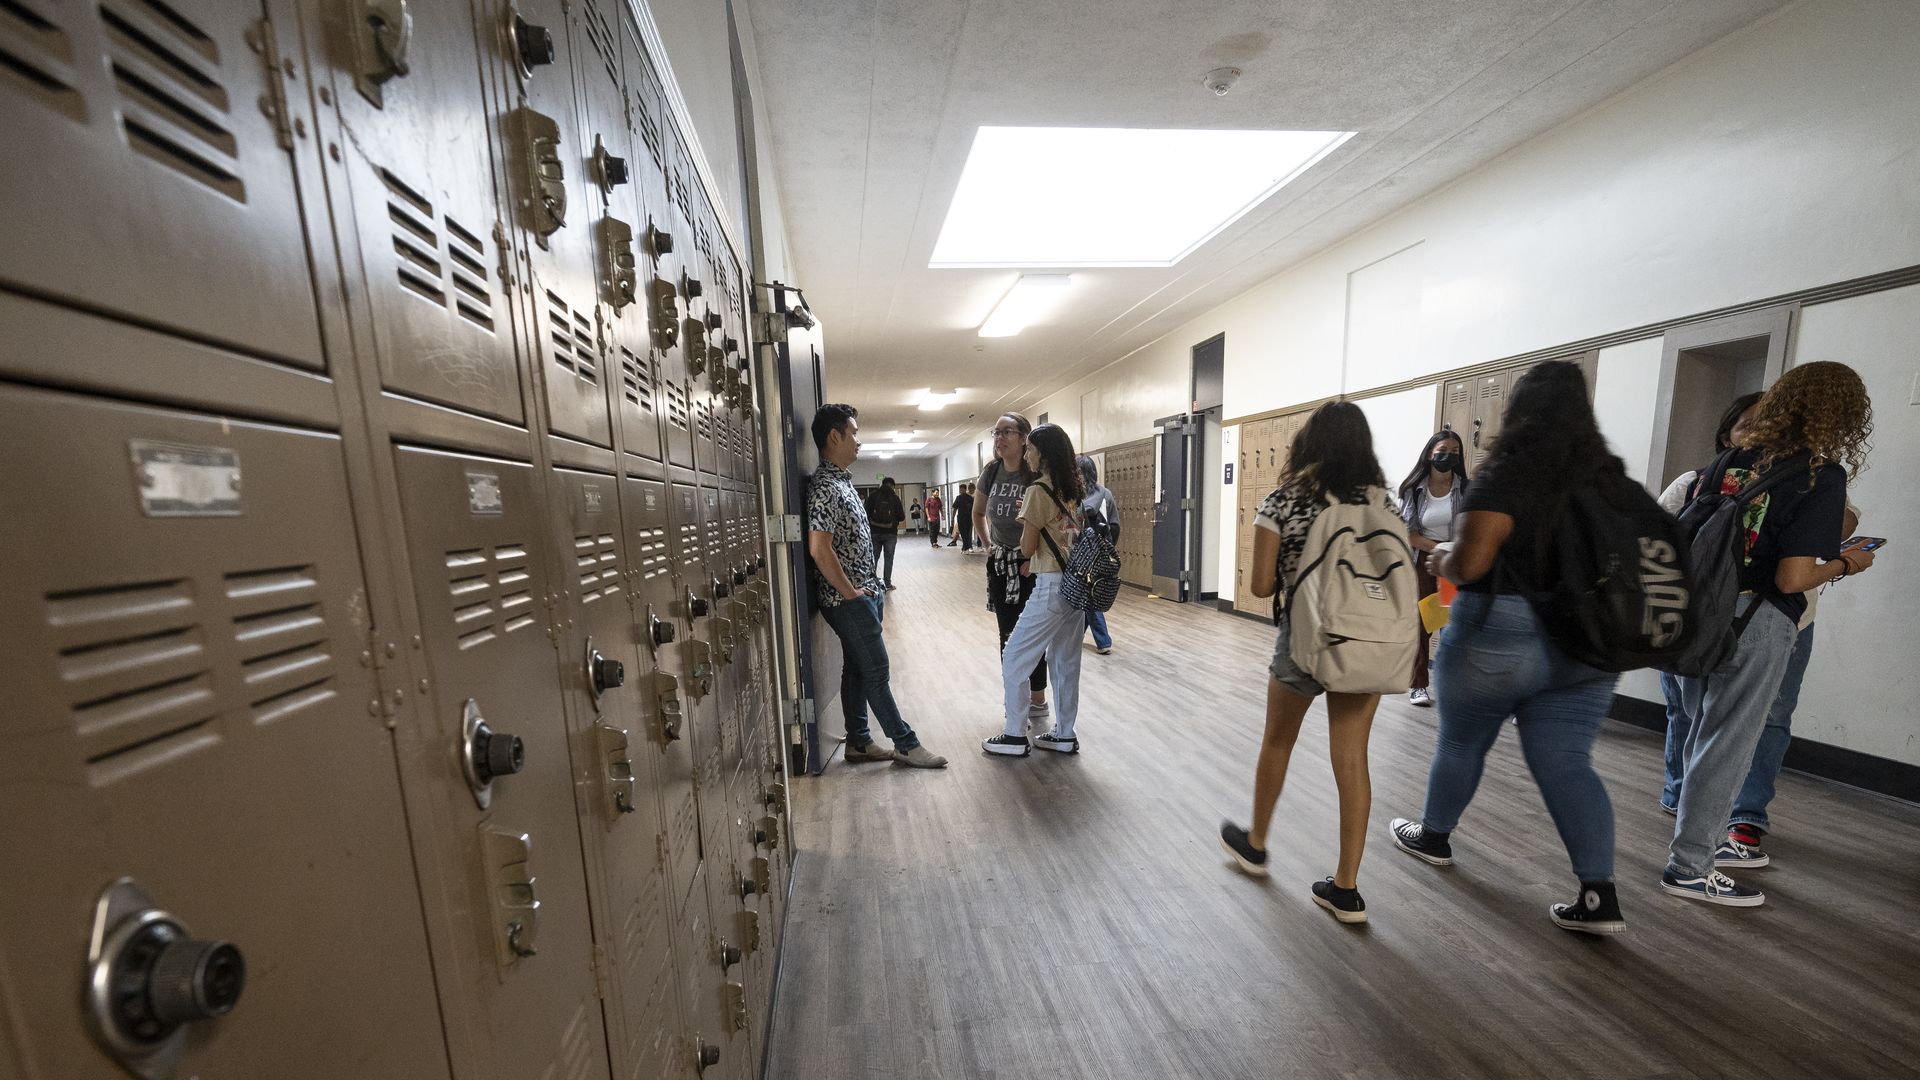 Students head to class after returning from summer break at Anaheim High School in Anaheim, CA on Wednesday, August 10, 2022.